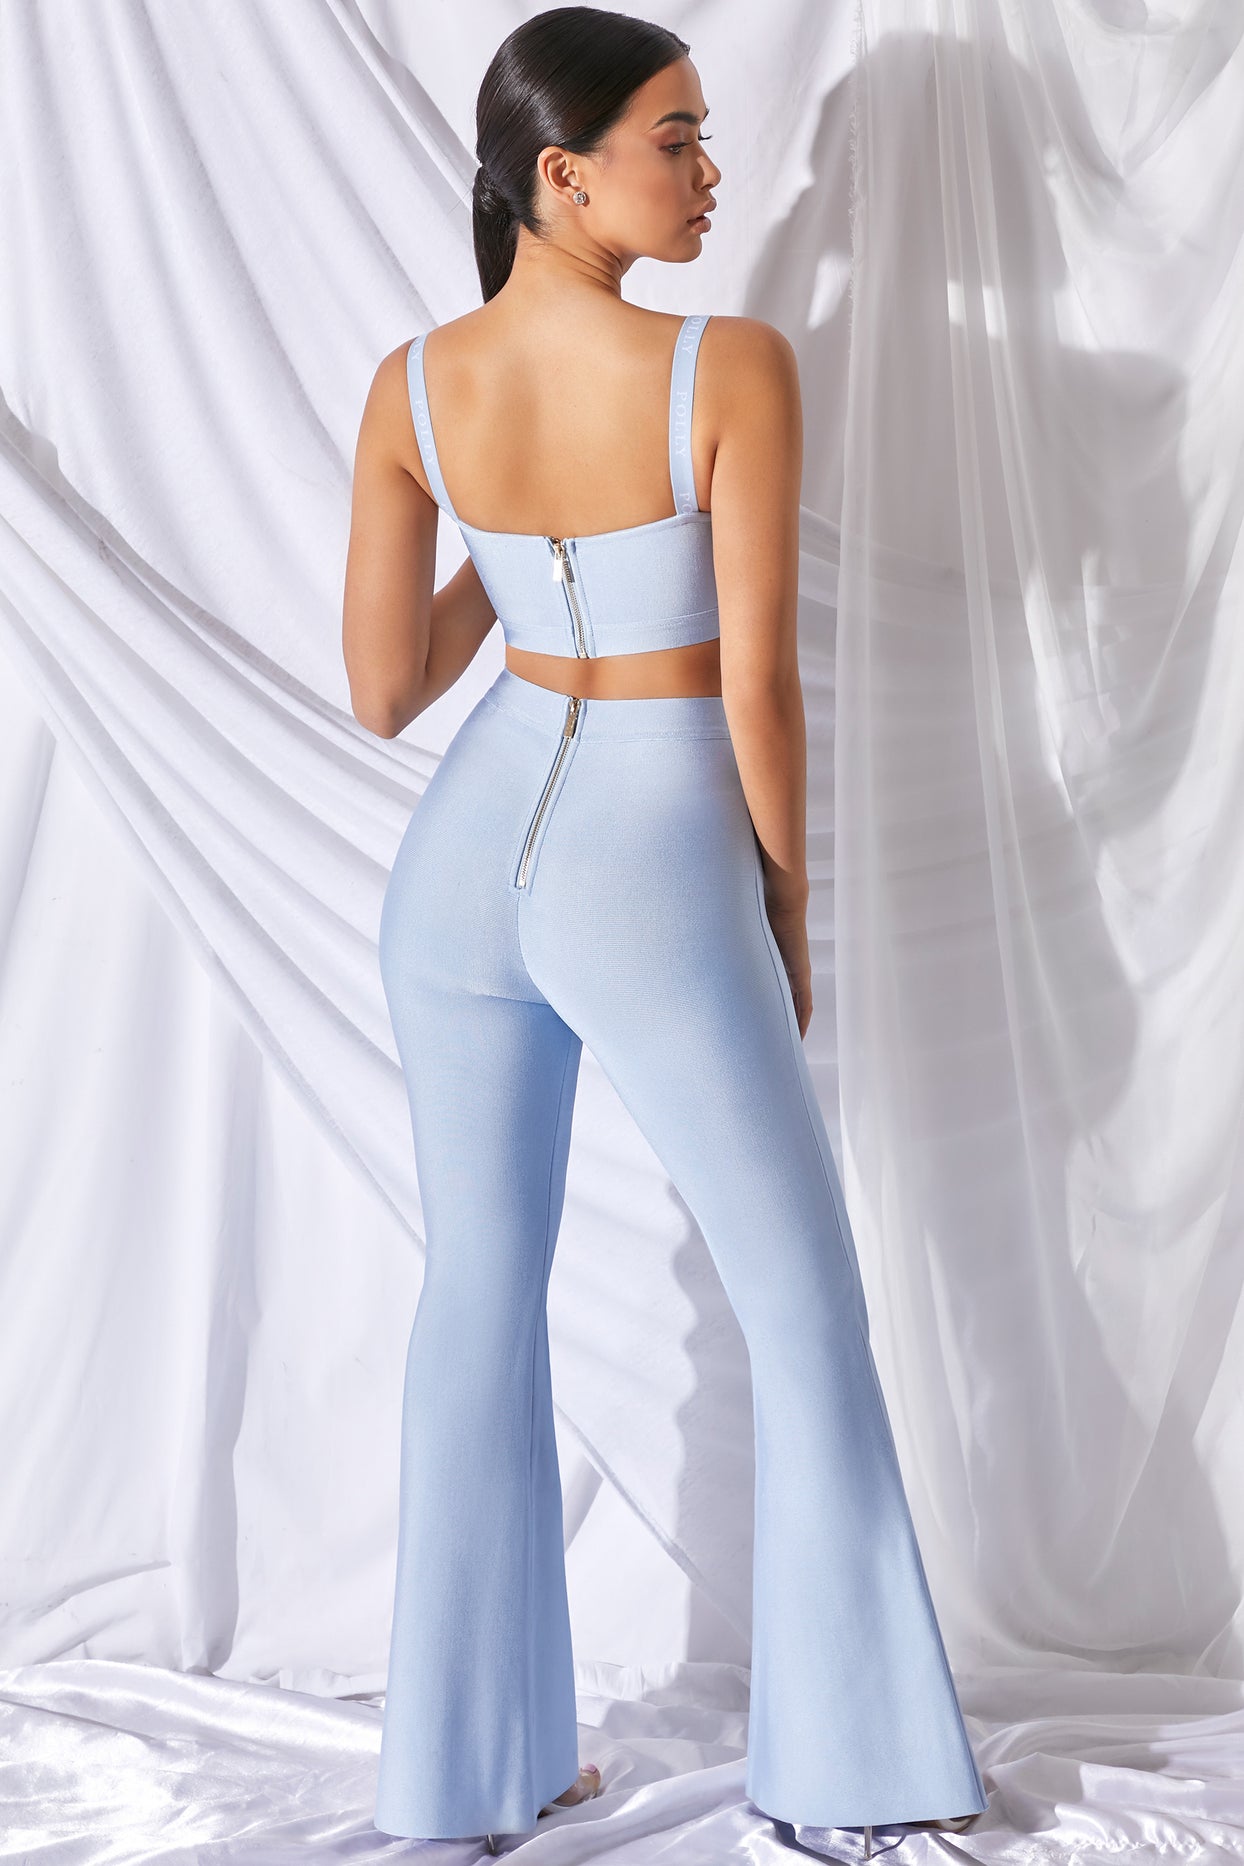 Too Good For You Petite High Waisted Bandage Flare Trousers in Blue